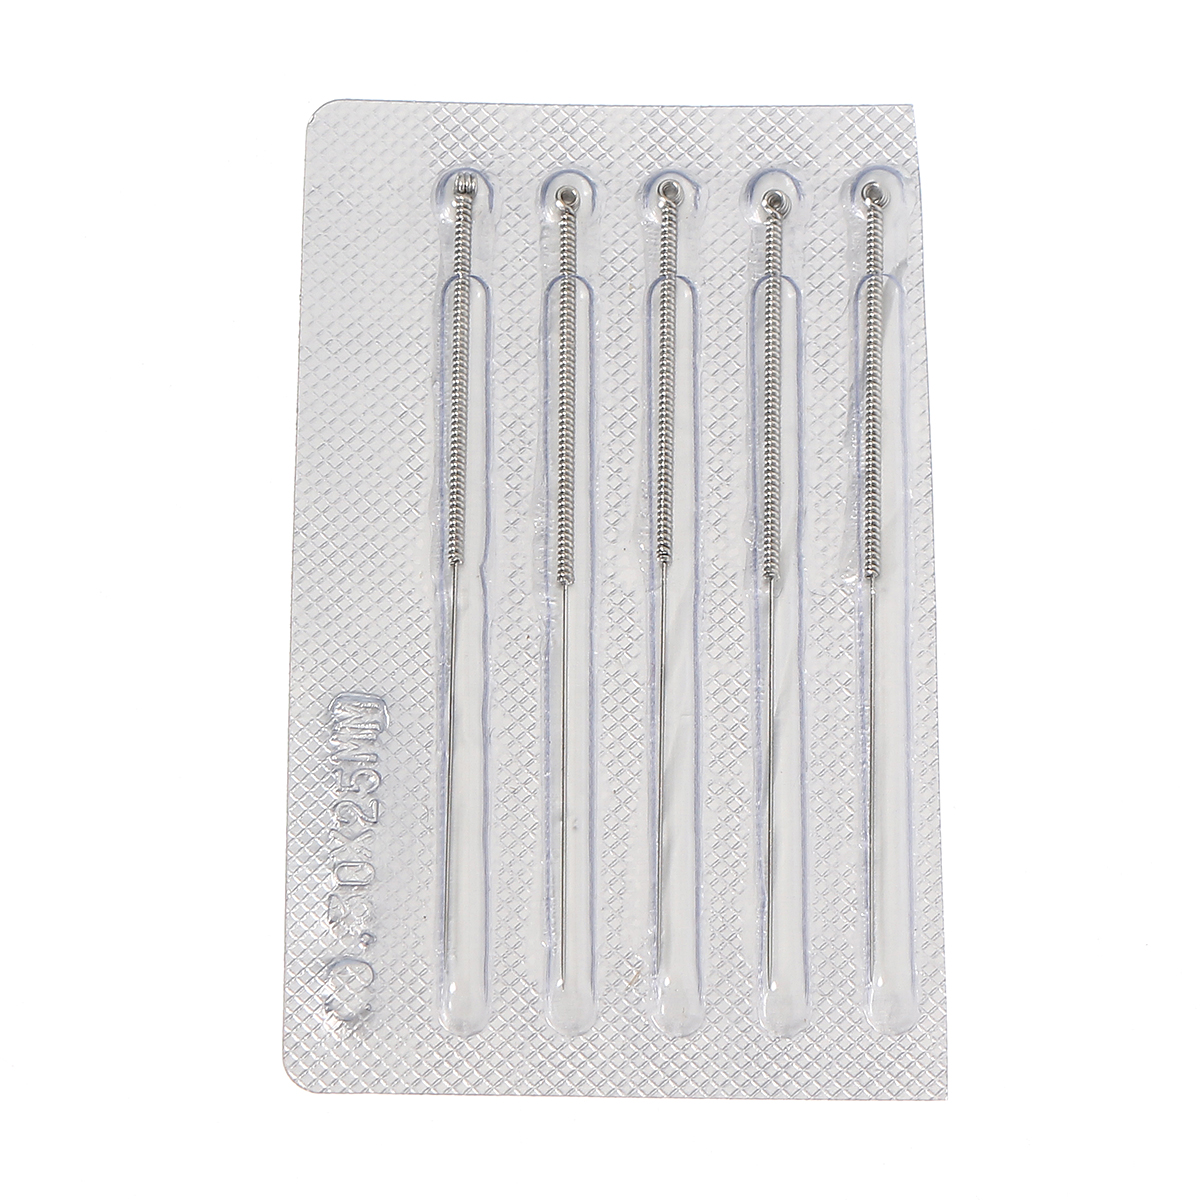 5Pcs Special Tattoo Needle Laser Freckle Dark Spot Removal Skin Moles Removed Needles